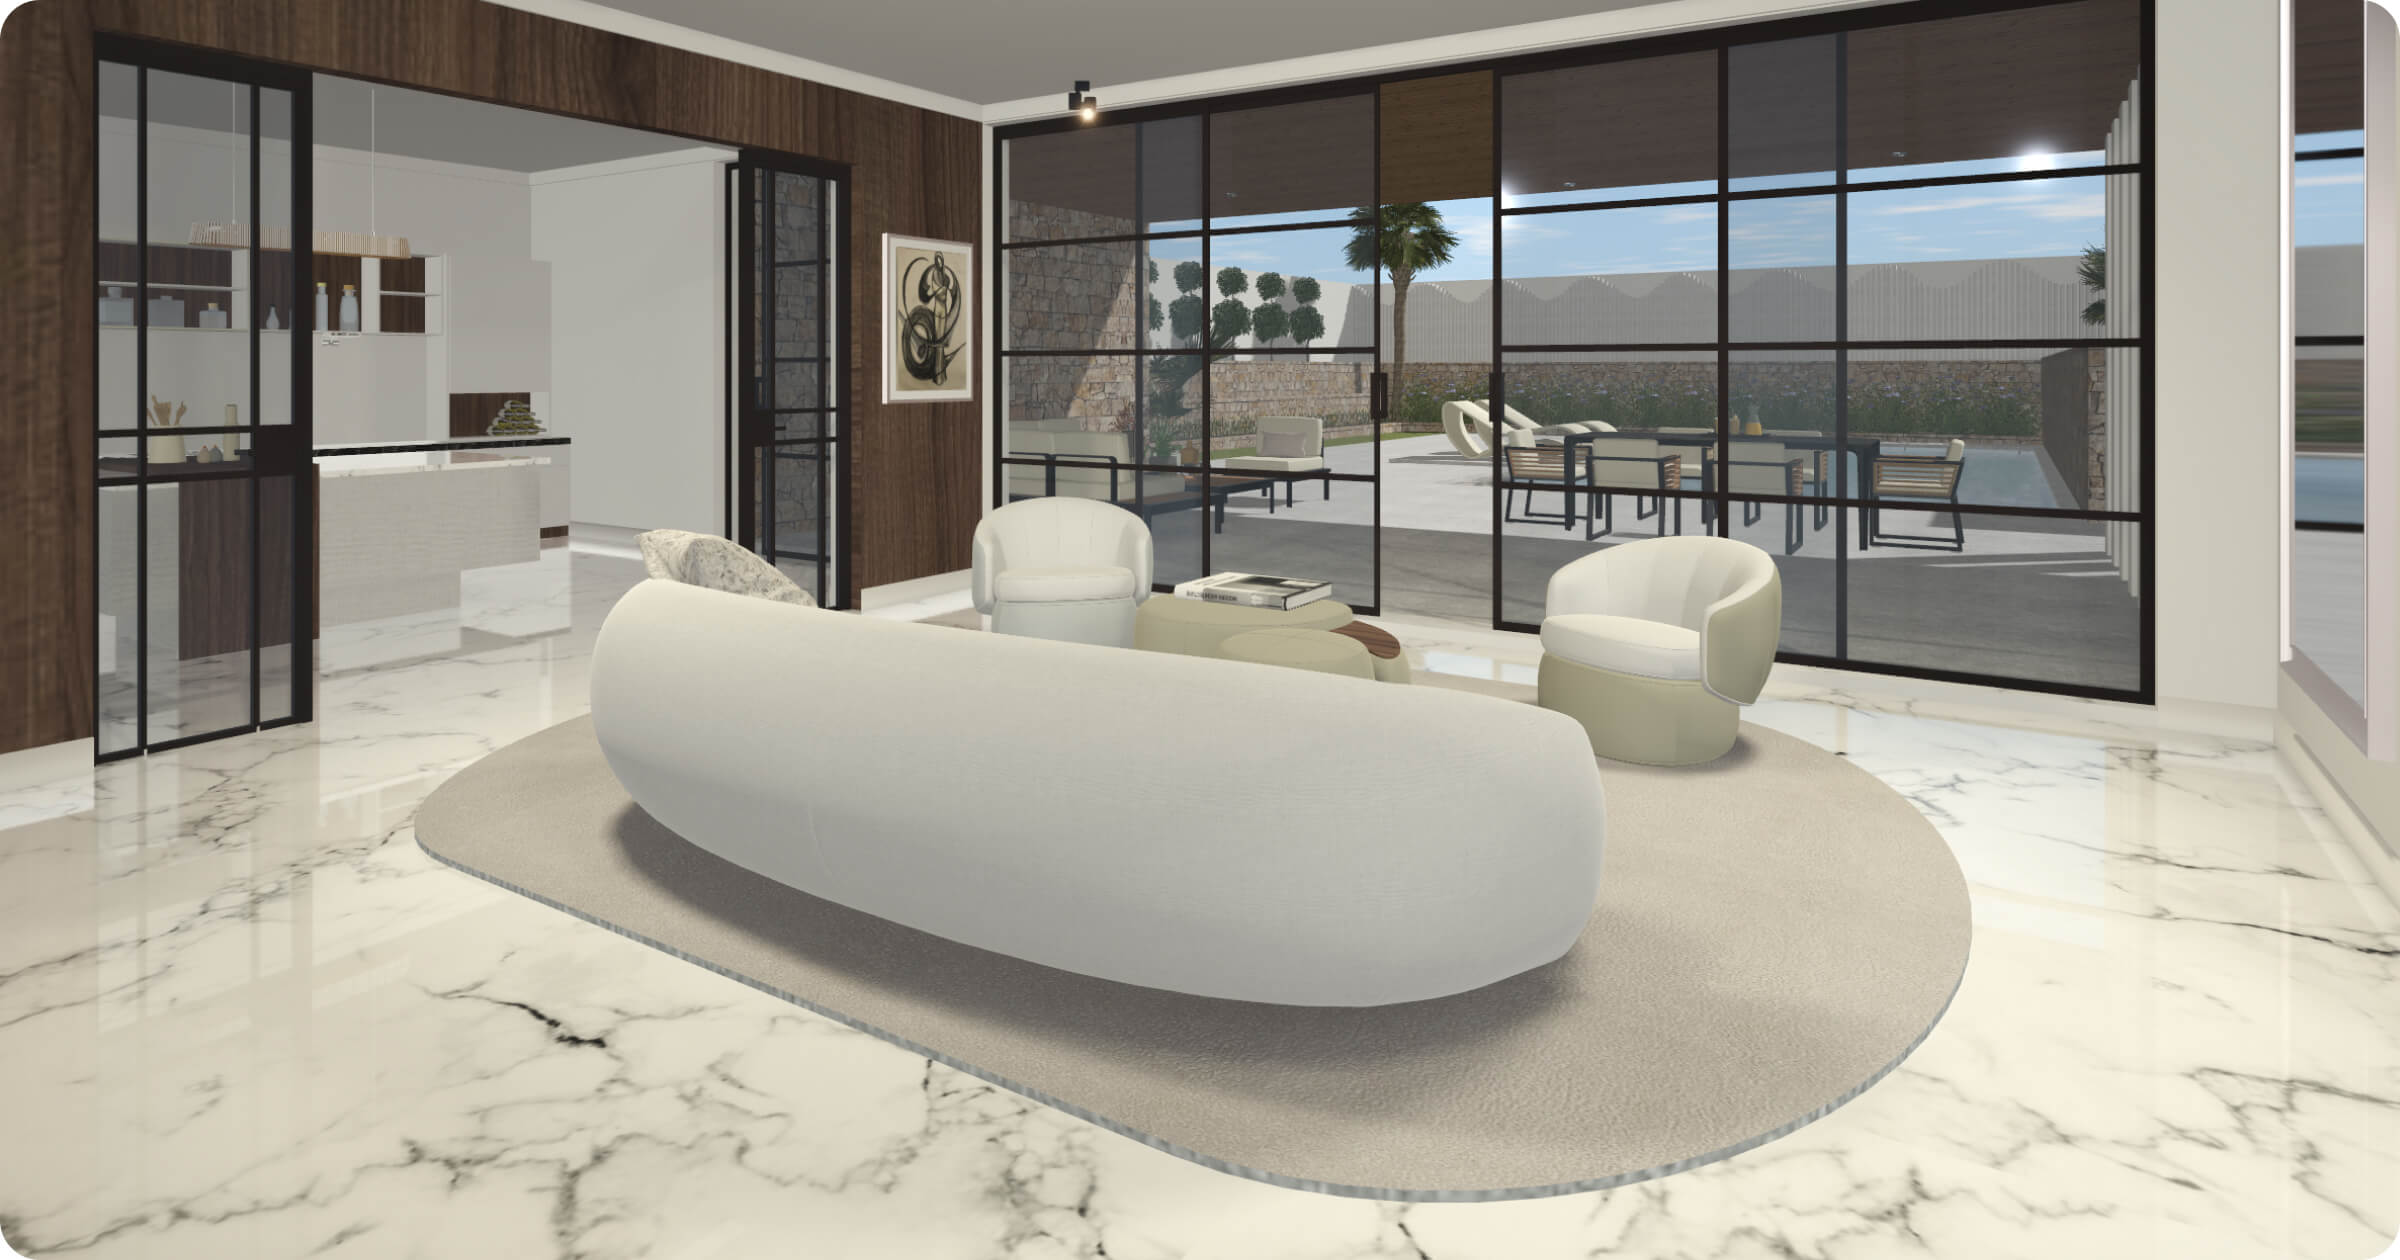 3D rendering of an interior design project made in Live Home 3D.